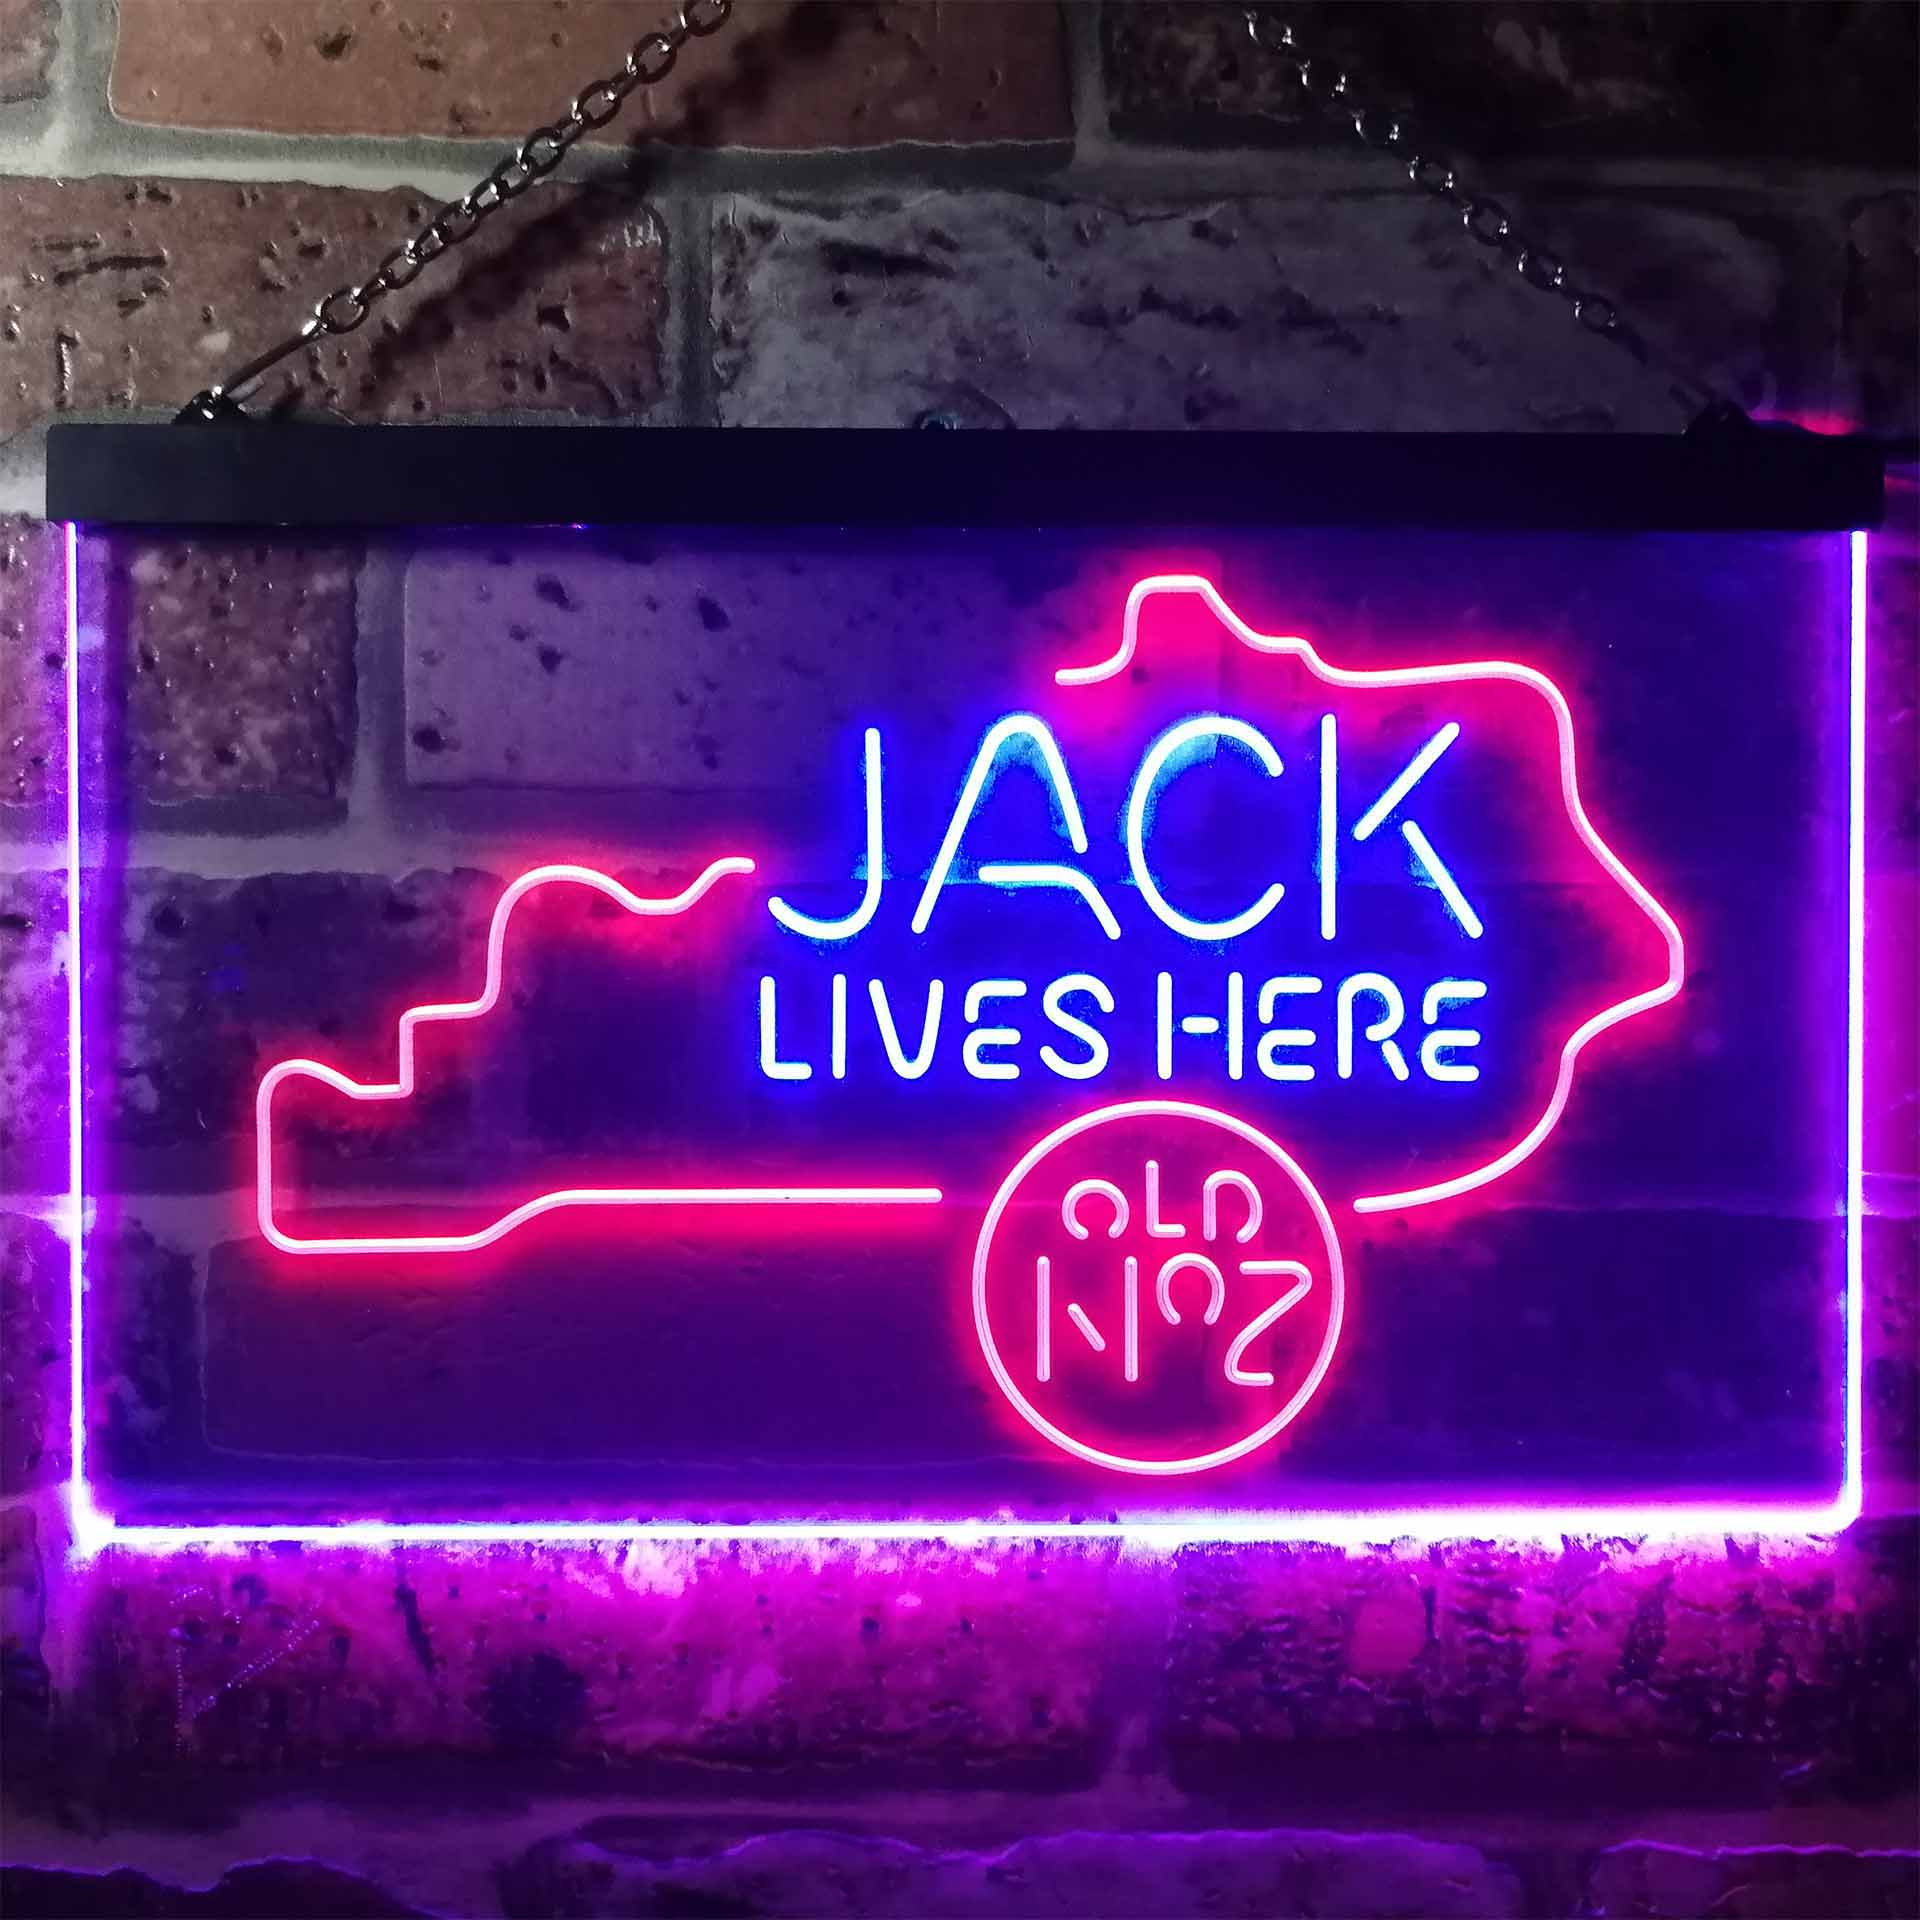 Kentucky Jack Lives Here Neon LED Sign